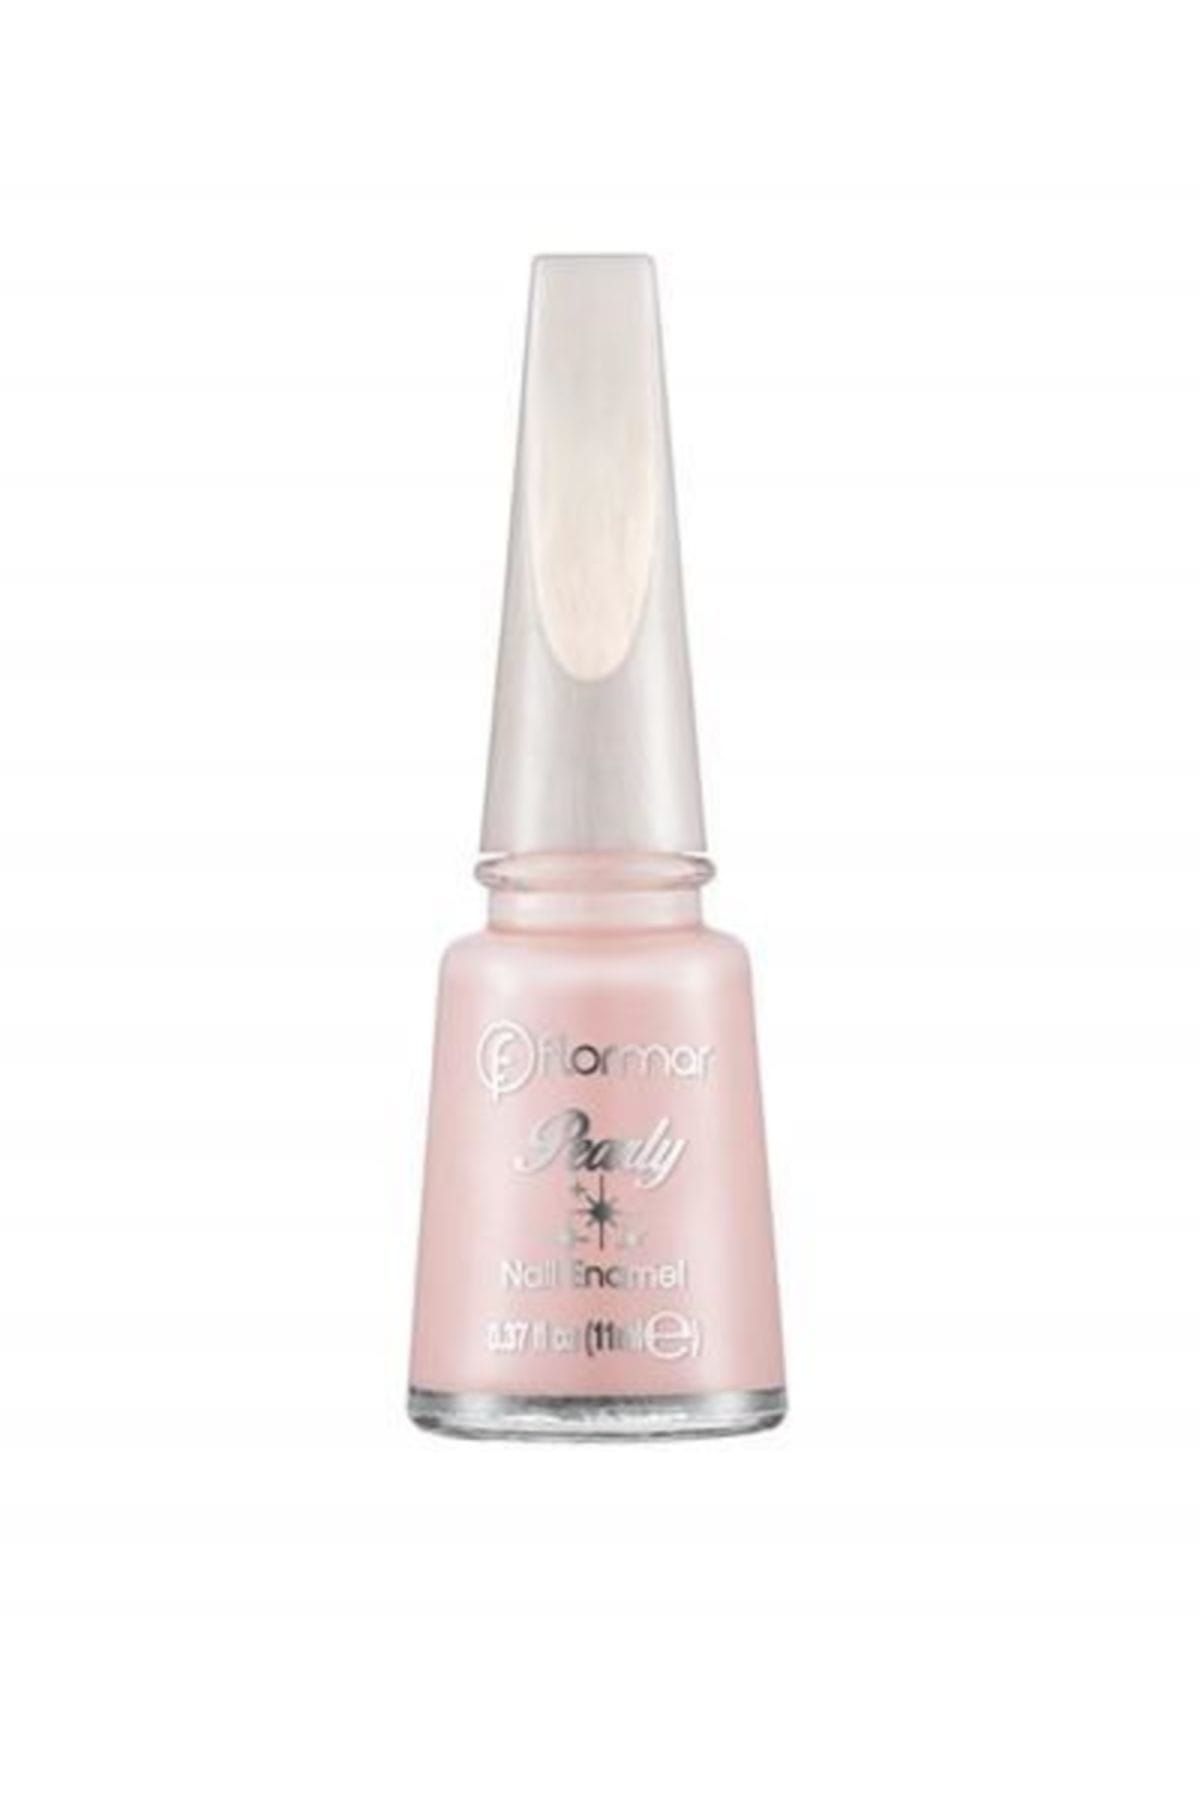 Flormar Pearly Oje - No:111 8690604280629